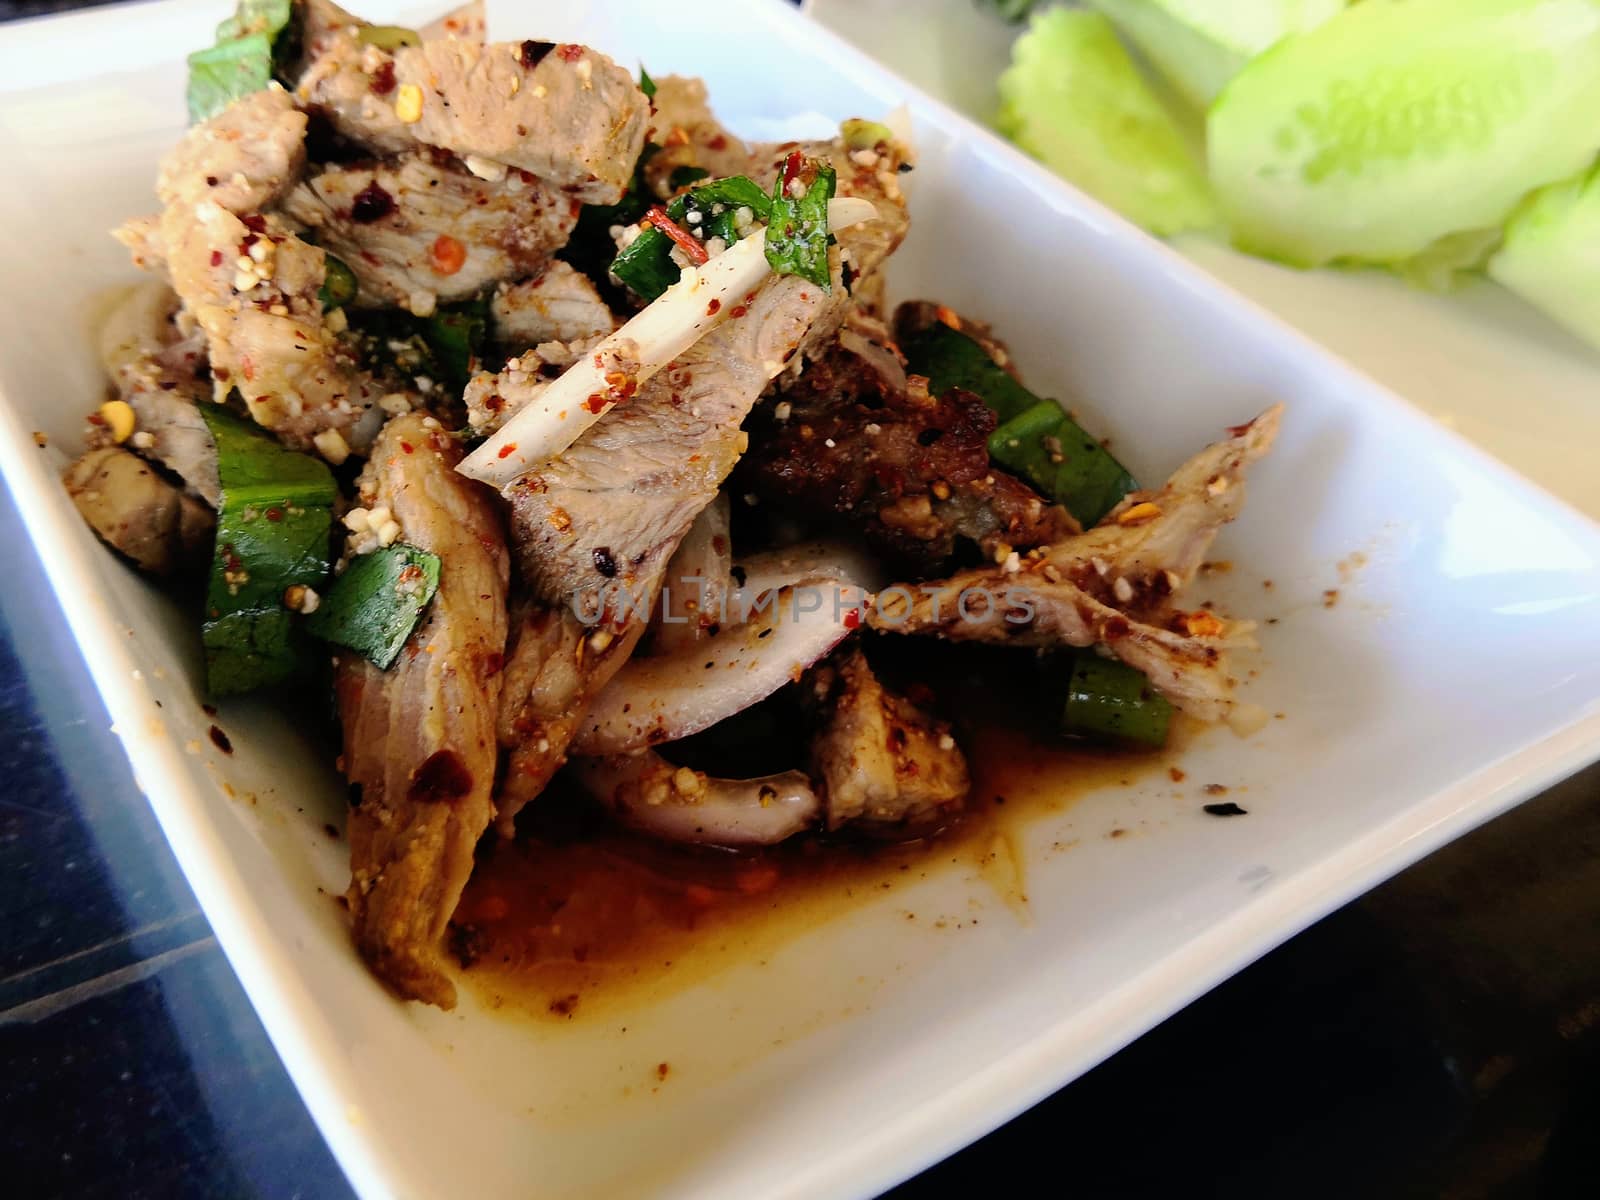 Grilled pork spicy salad on white plate